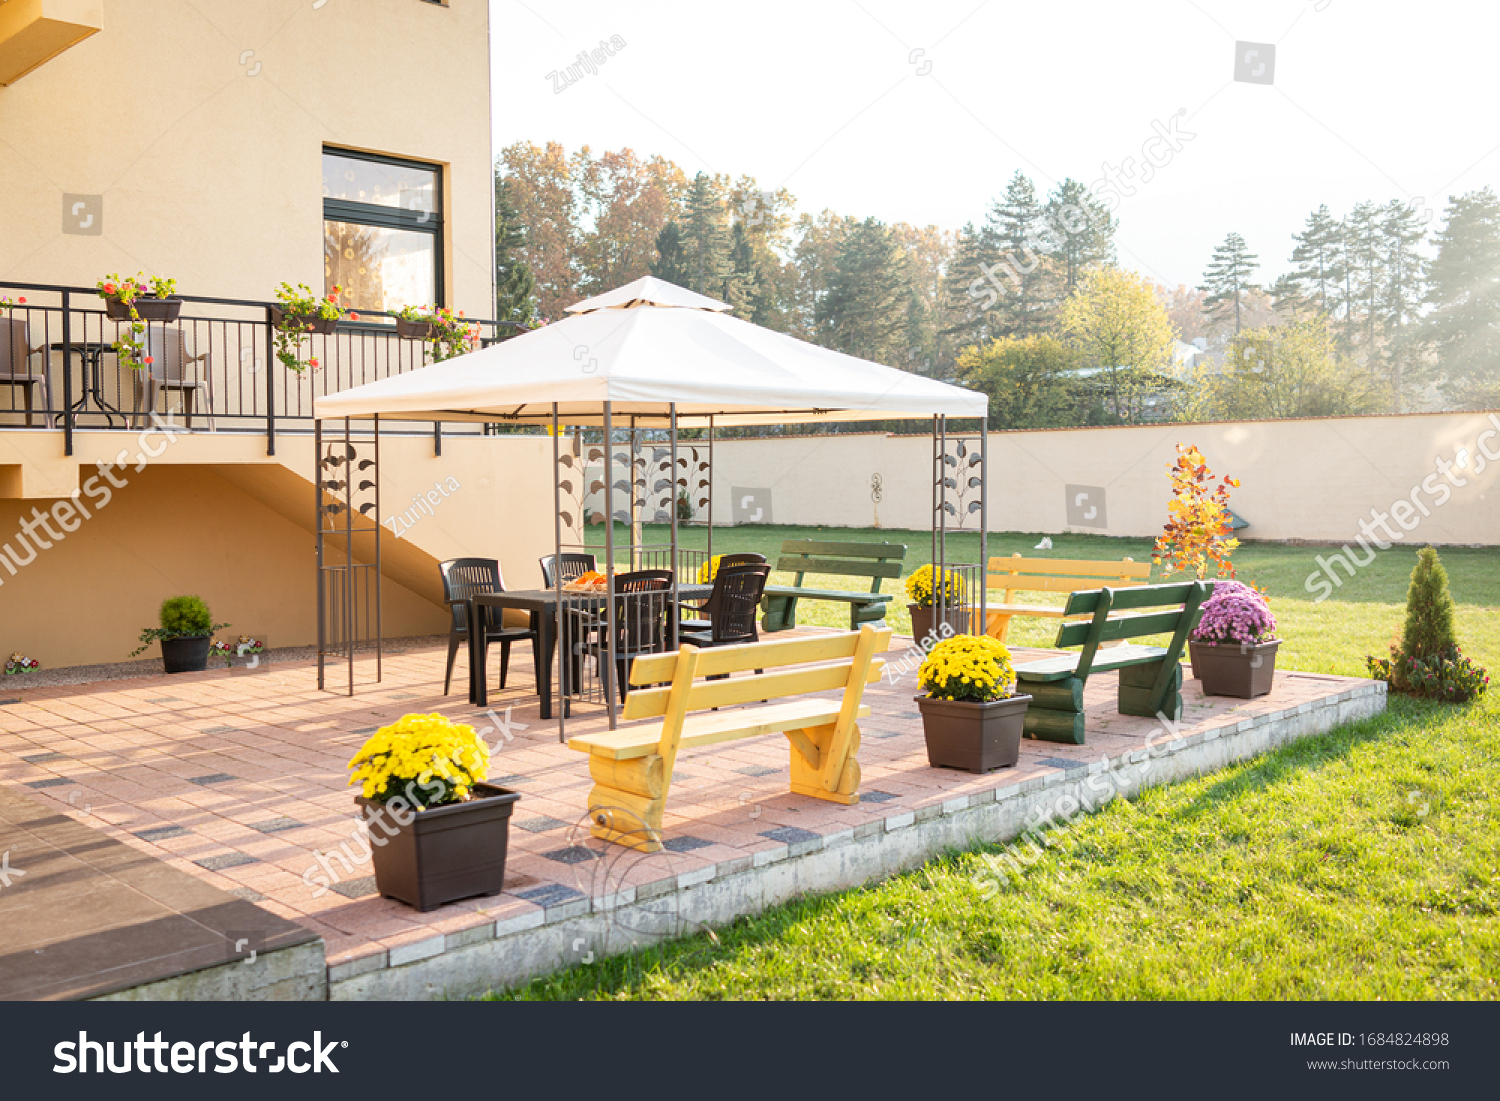 Patio with garden furniture and parasol #1684824898